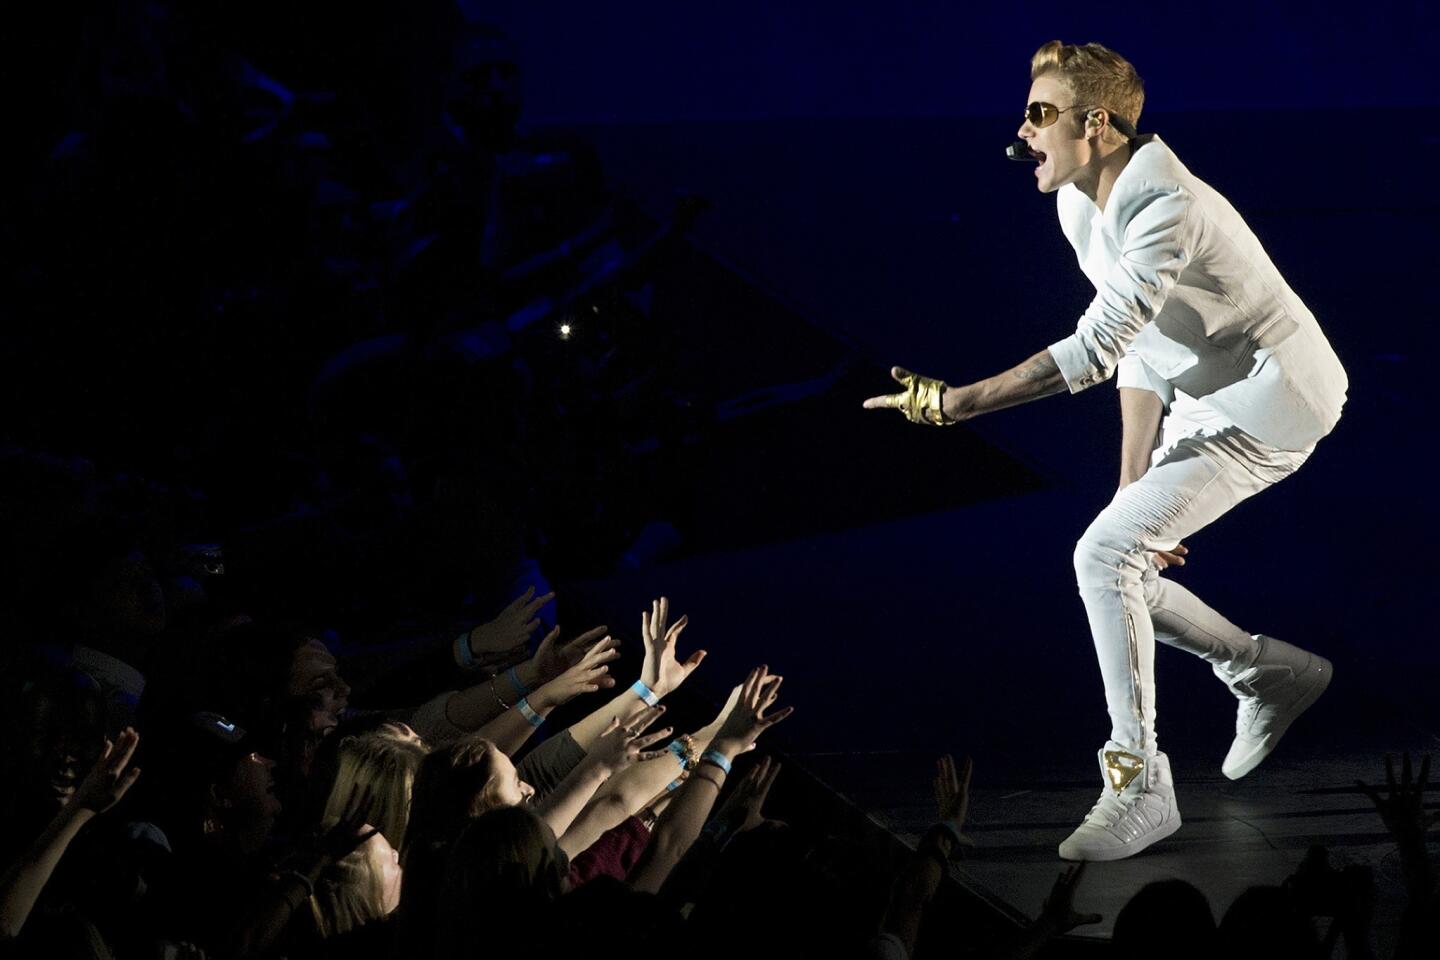 Justin Bieber collapsed Thursday night after suffering breathing problems while playing the third of four shows planned for London's O2 arena. After receiving oxygen from emergency personnel, the 19-year-old returned to finish his final four songs before heading to the hospital to be checked out. Bieber told the audience he wasn't feeling well before he stumbled backstage, according to TMZ and the Daily Mail. He fainted backstage, not onstage, his rep told the Associated Press. He still intended to play the fourth and final London show Friday night, according to his Twitter feed. Full story: Justin Bieber collapses at London concert, returns to finish show